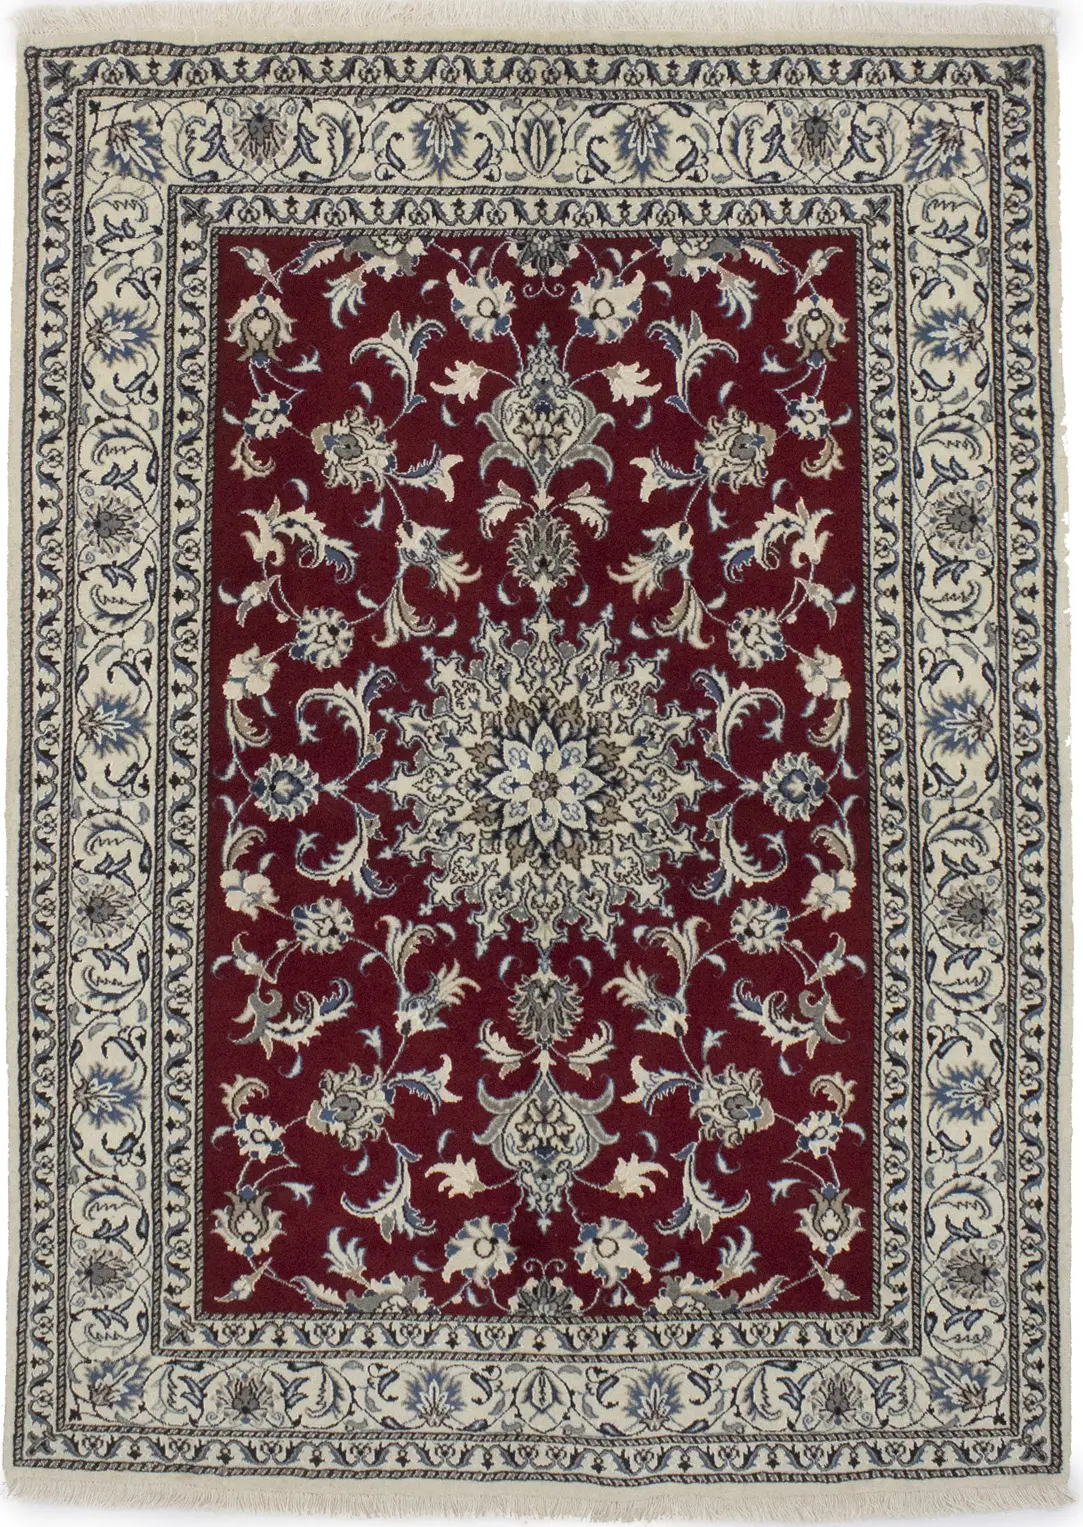 Vintage Red Floral Classic 5'4X7'7 Nain Persian Rug